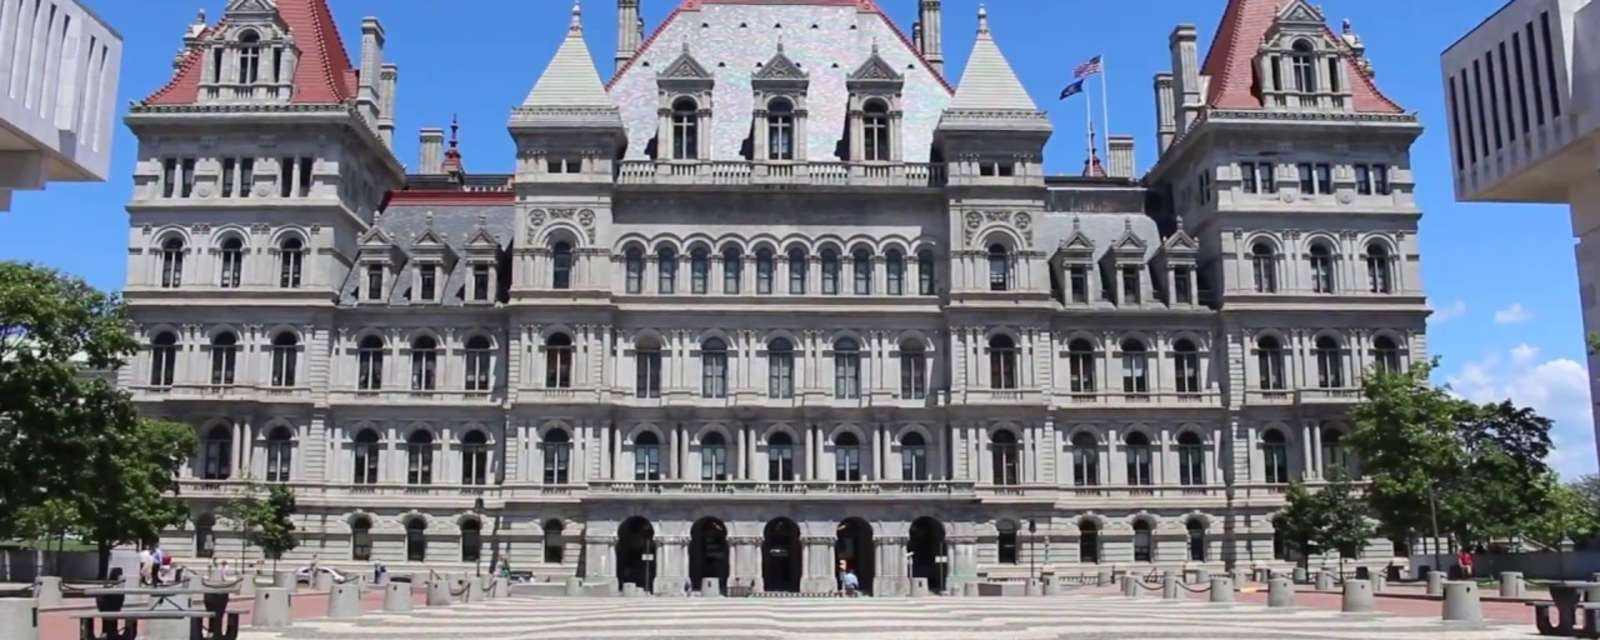 Video Thumbnail - youtube - What is your favorite Albany building?